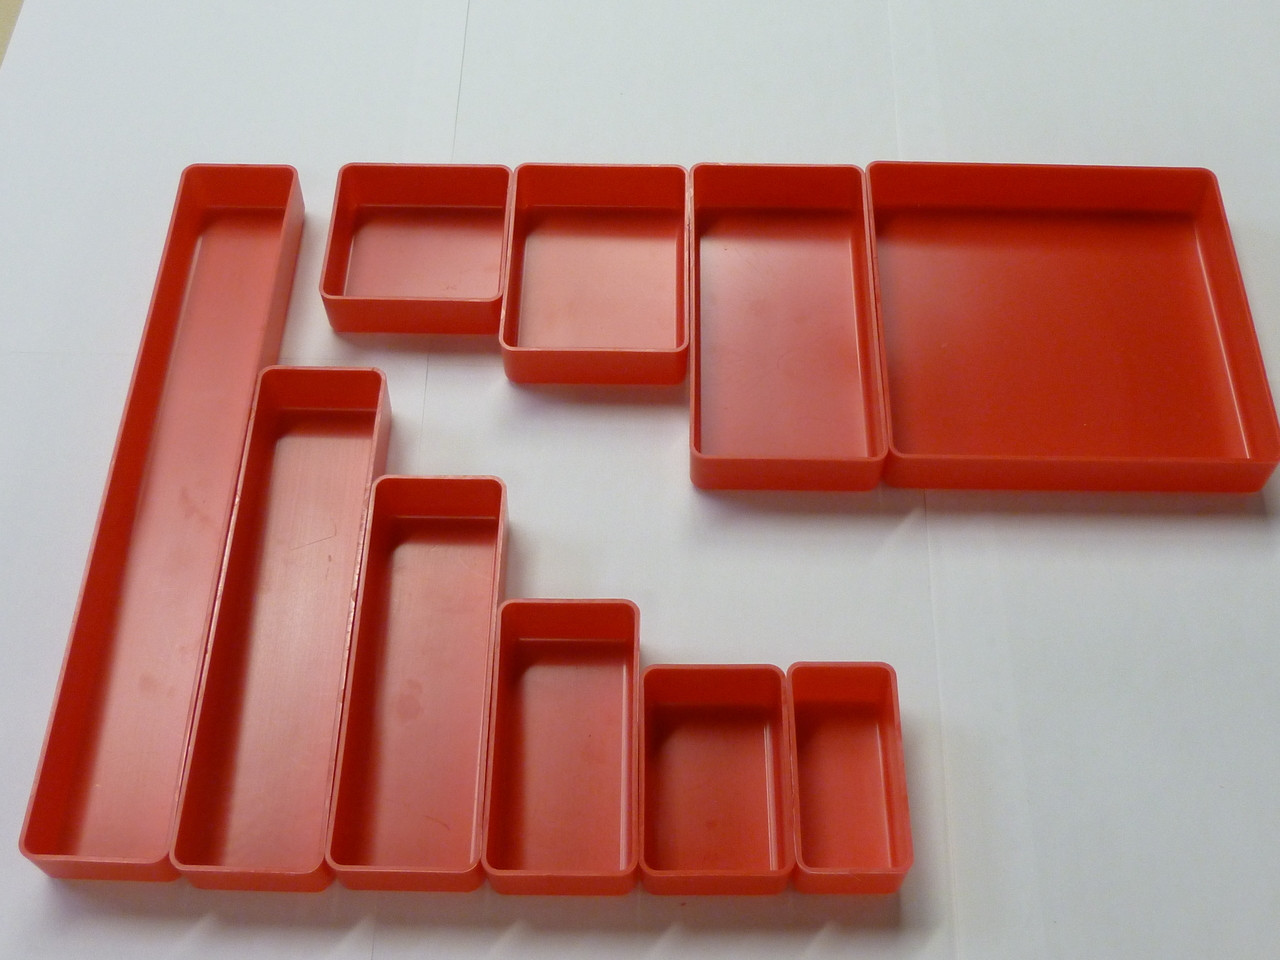 1 Deep, Red Plastic Box Sample Assortment (1 each of 10 sizes)